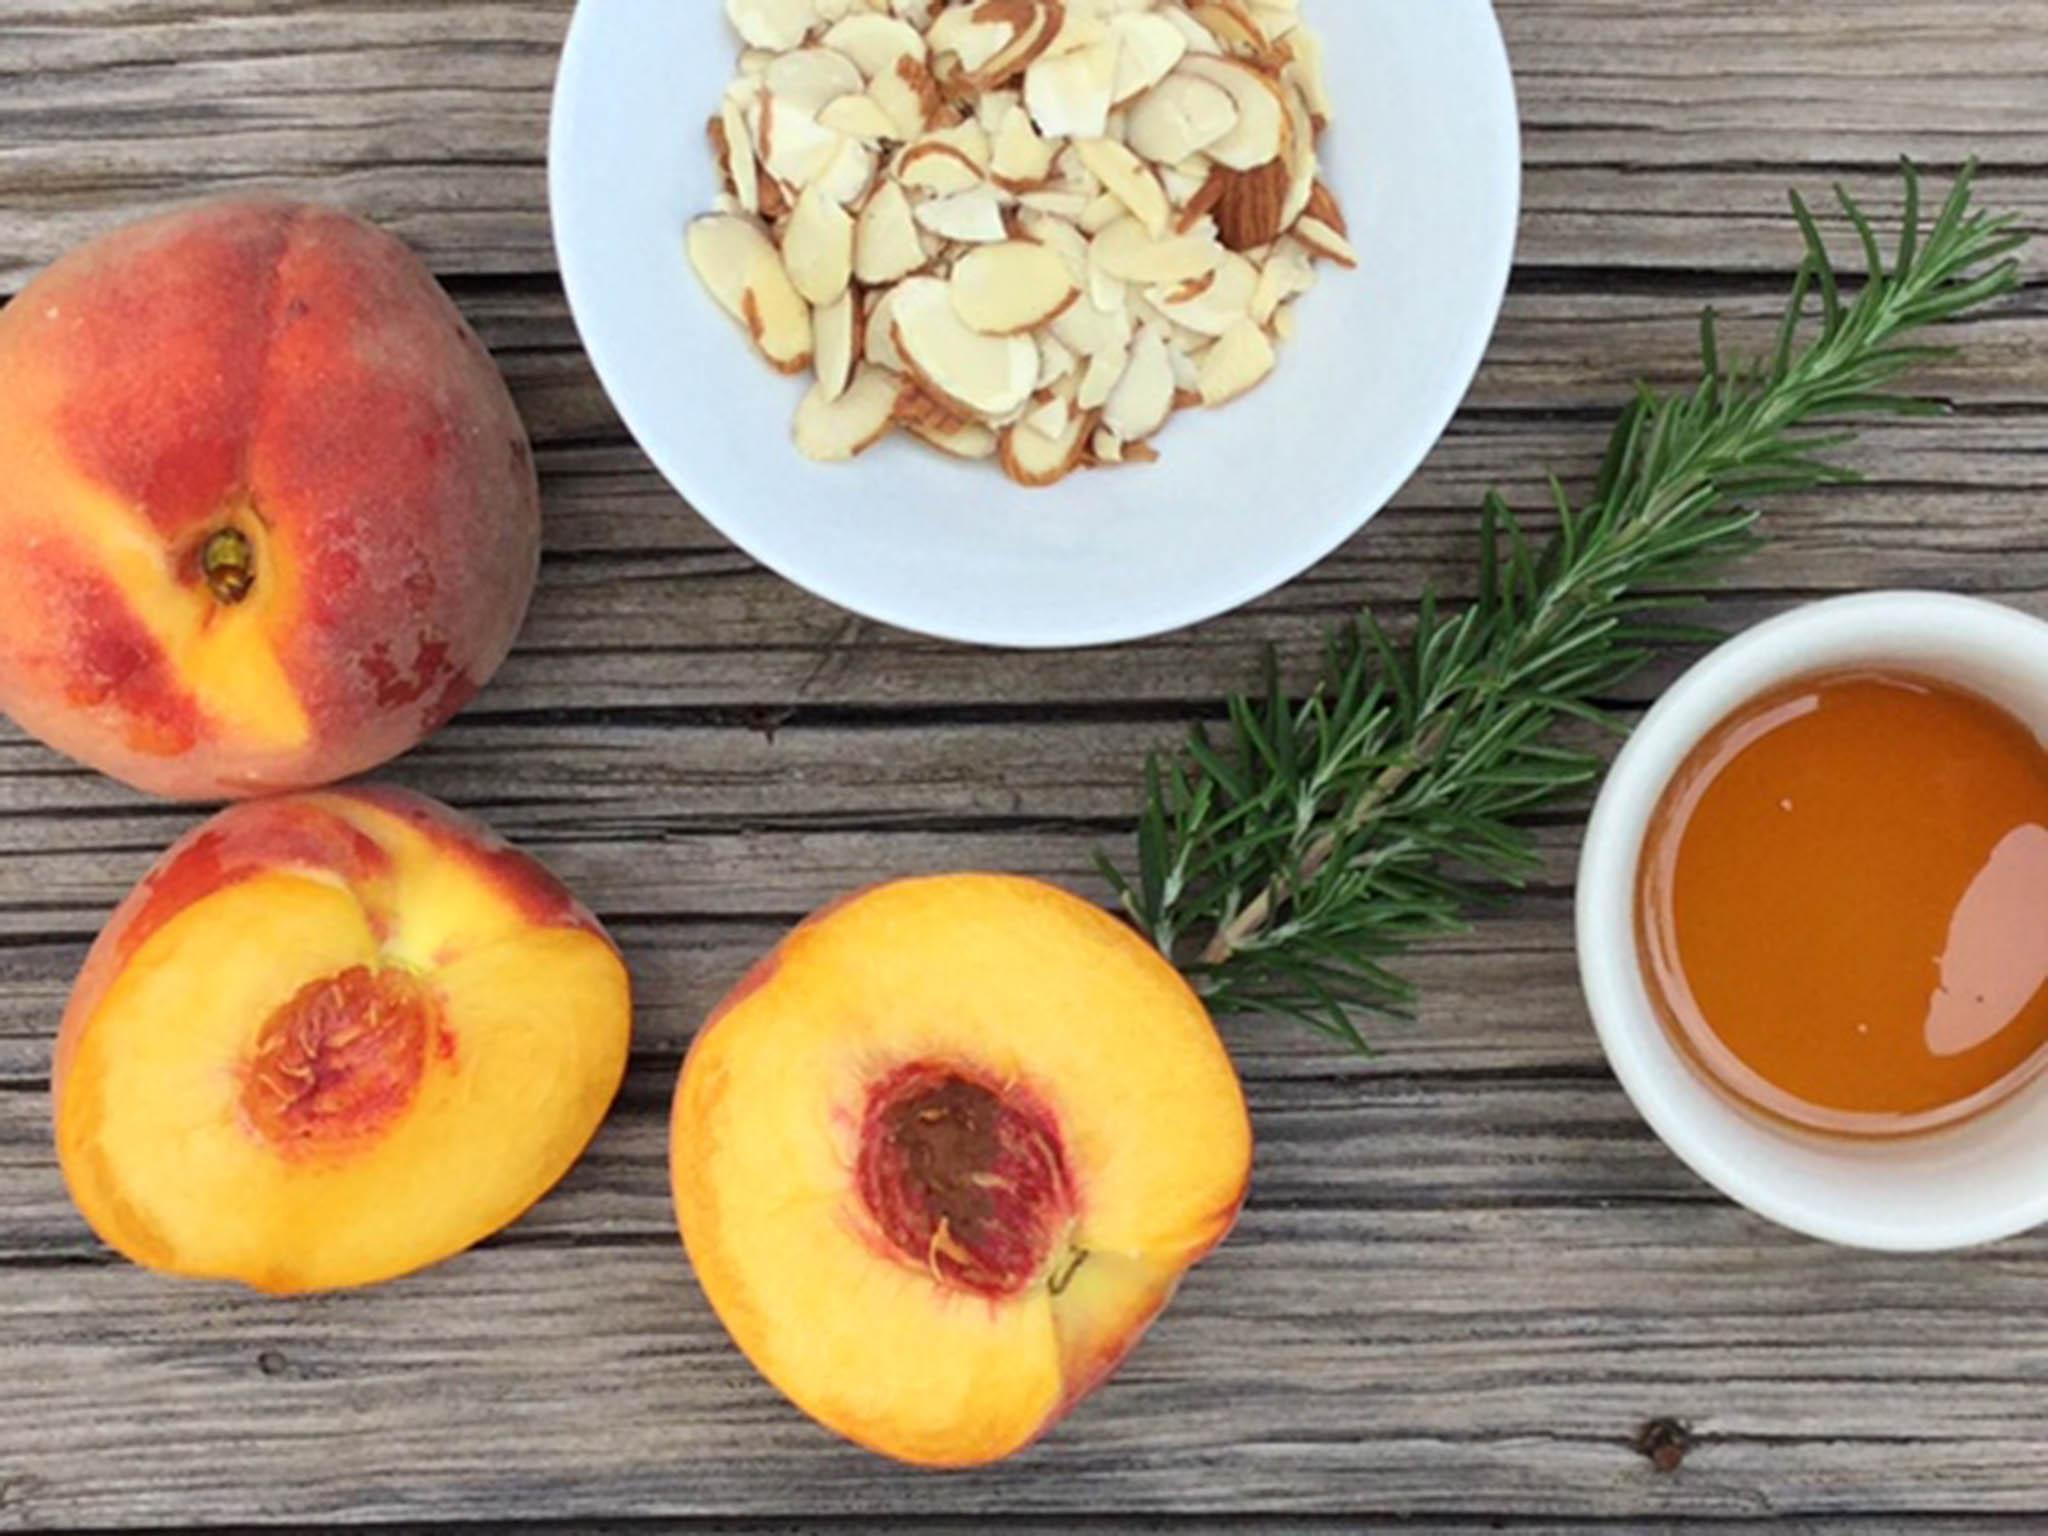 Aside from eating them au naturel, serve peaches sautéd with delicate flavourings